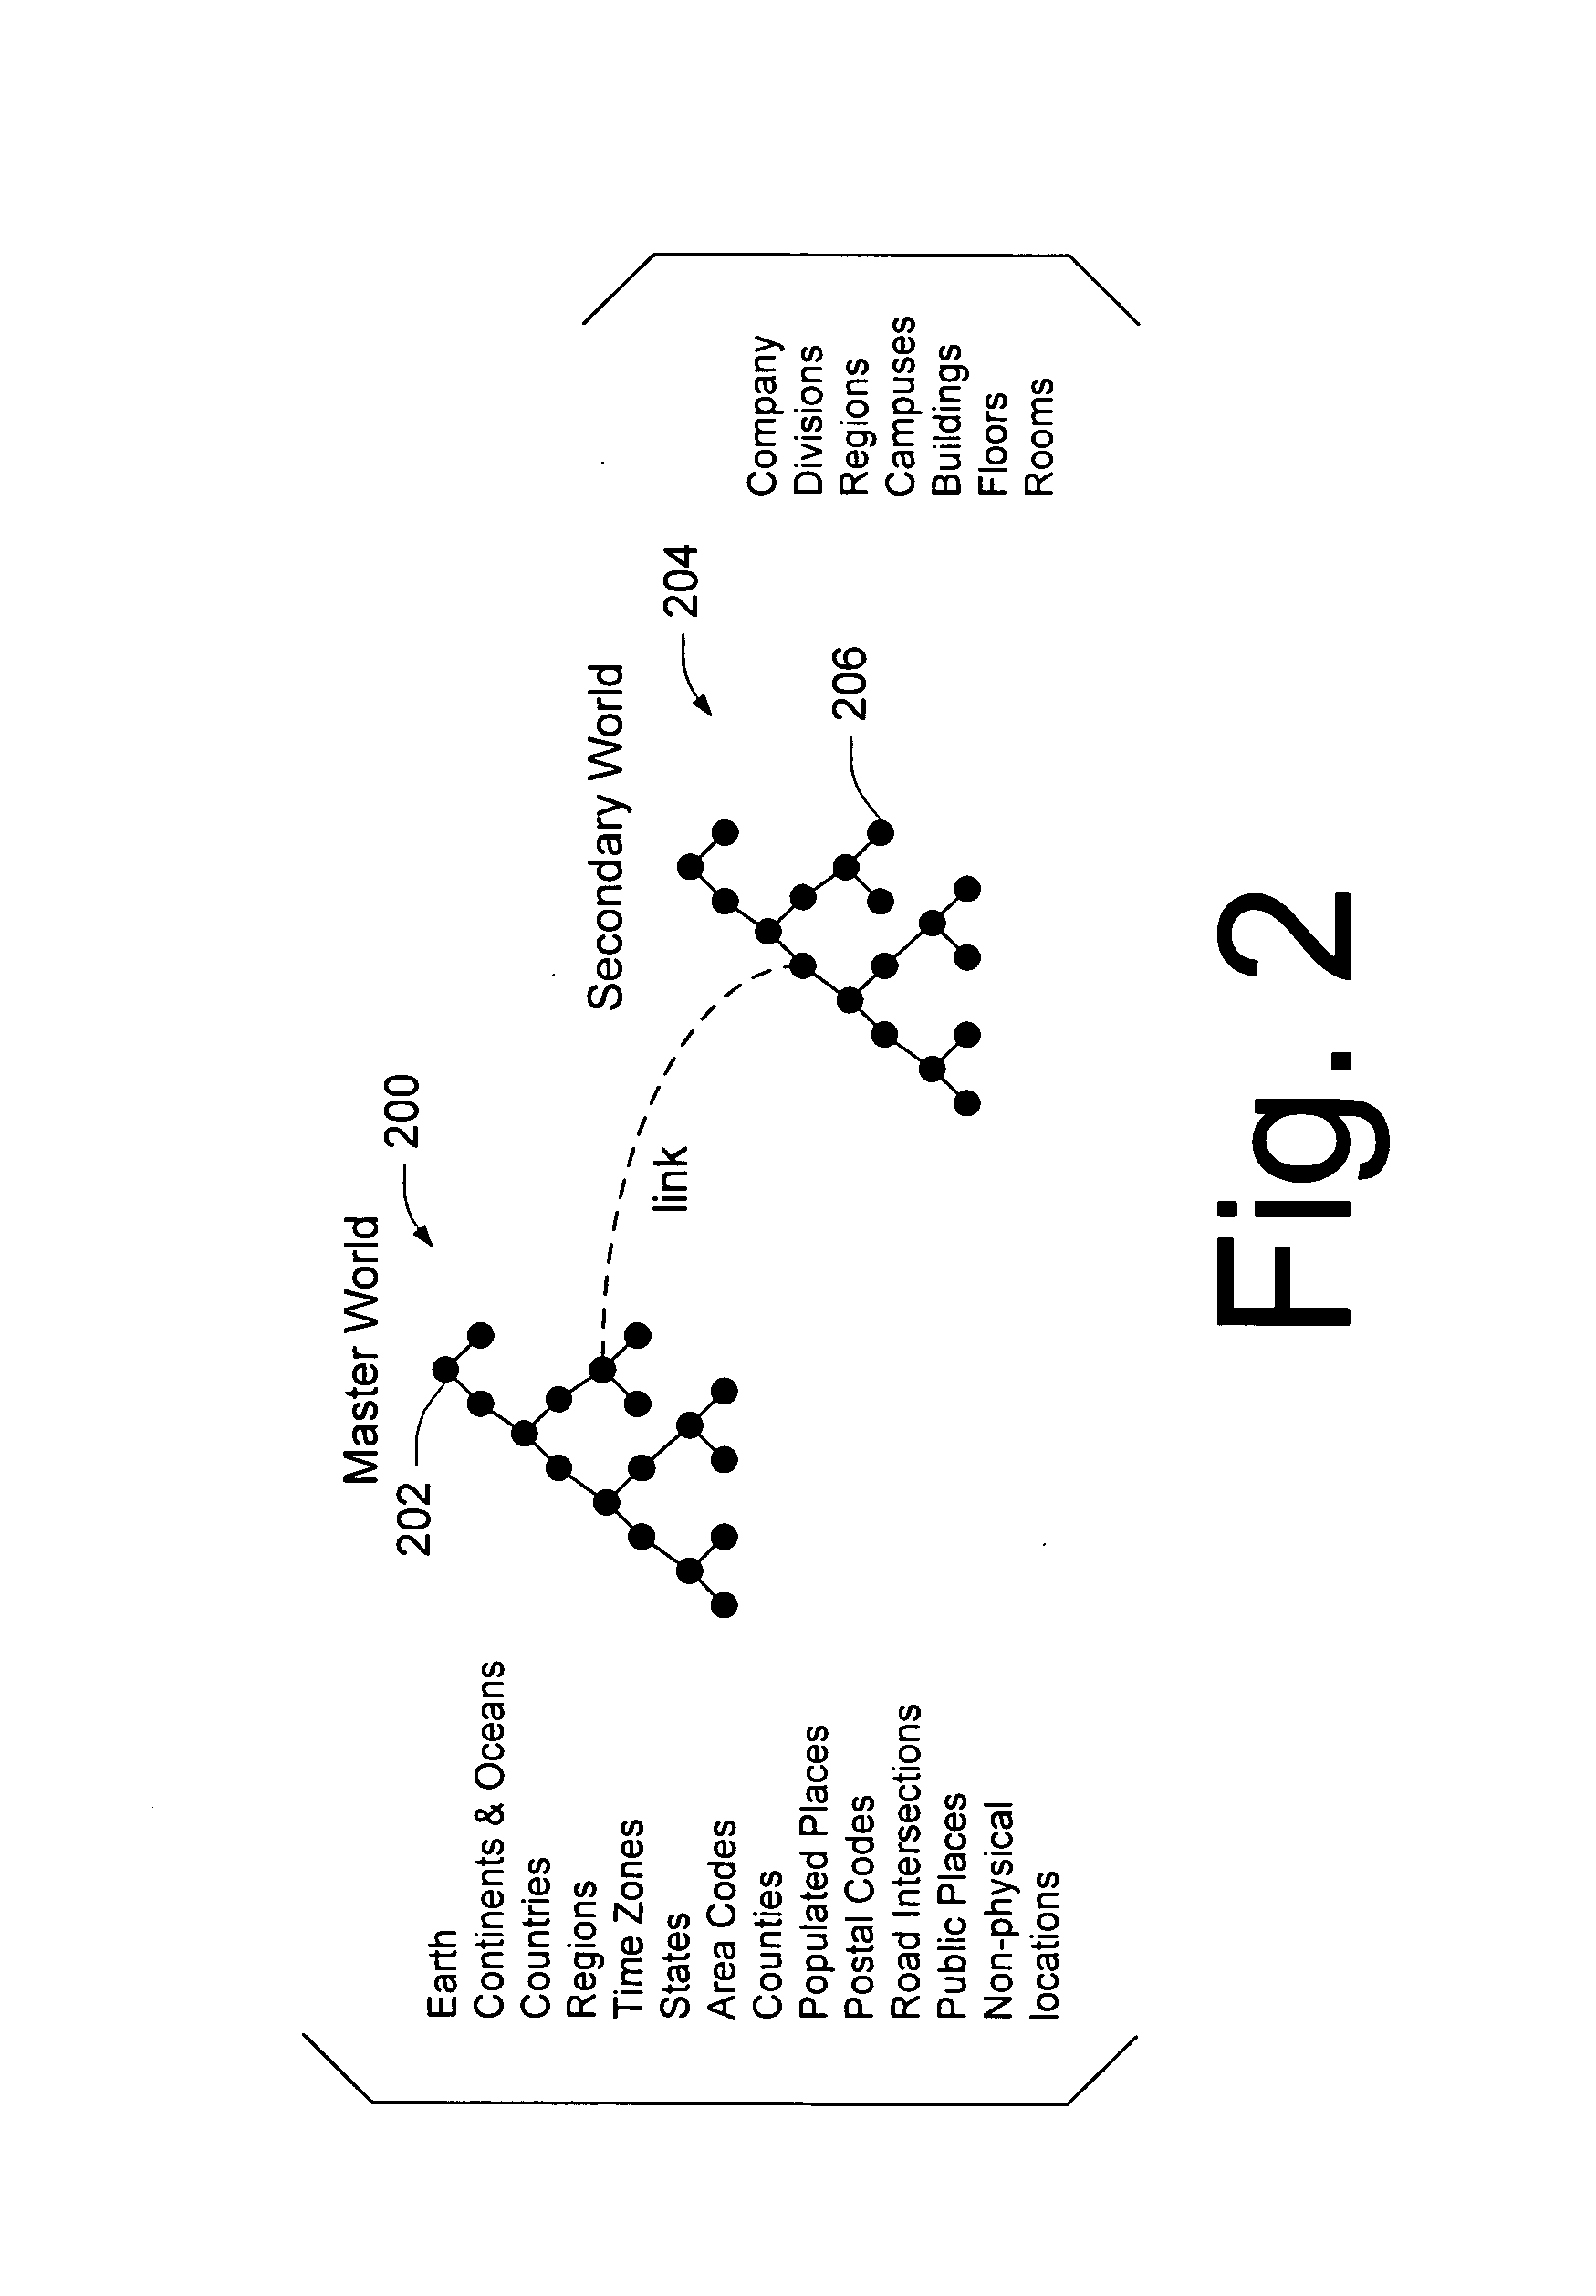 Context-aware systems and methods, location-aware systems and methods, context-aware vehicles and methods of operating the same, and location-aware vehicles and methods of operating the same